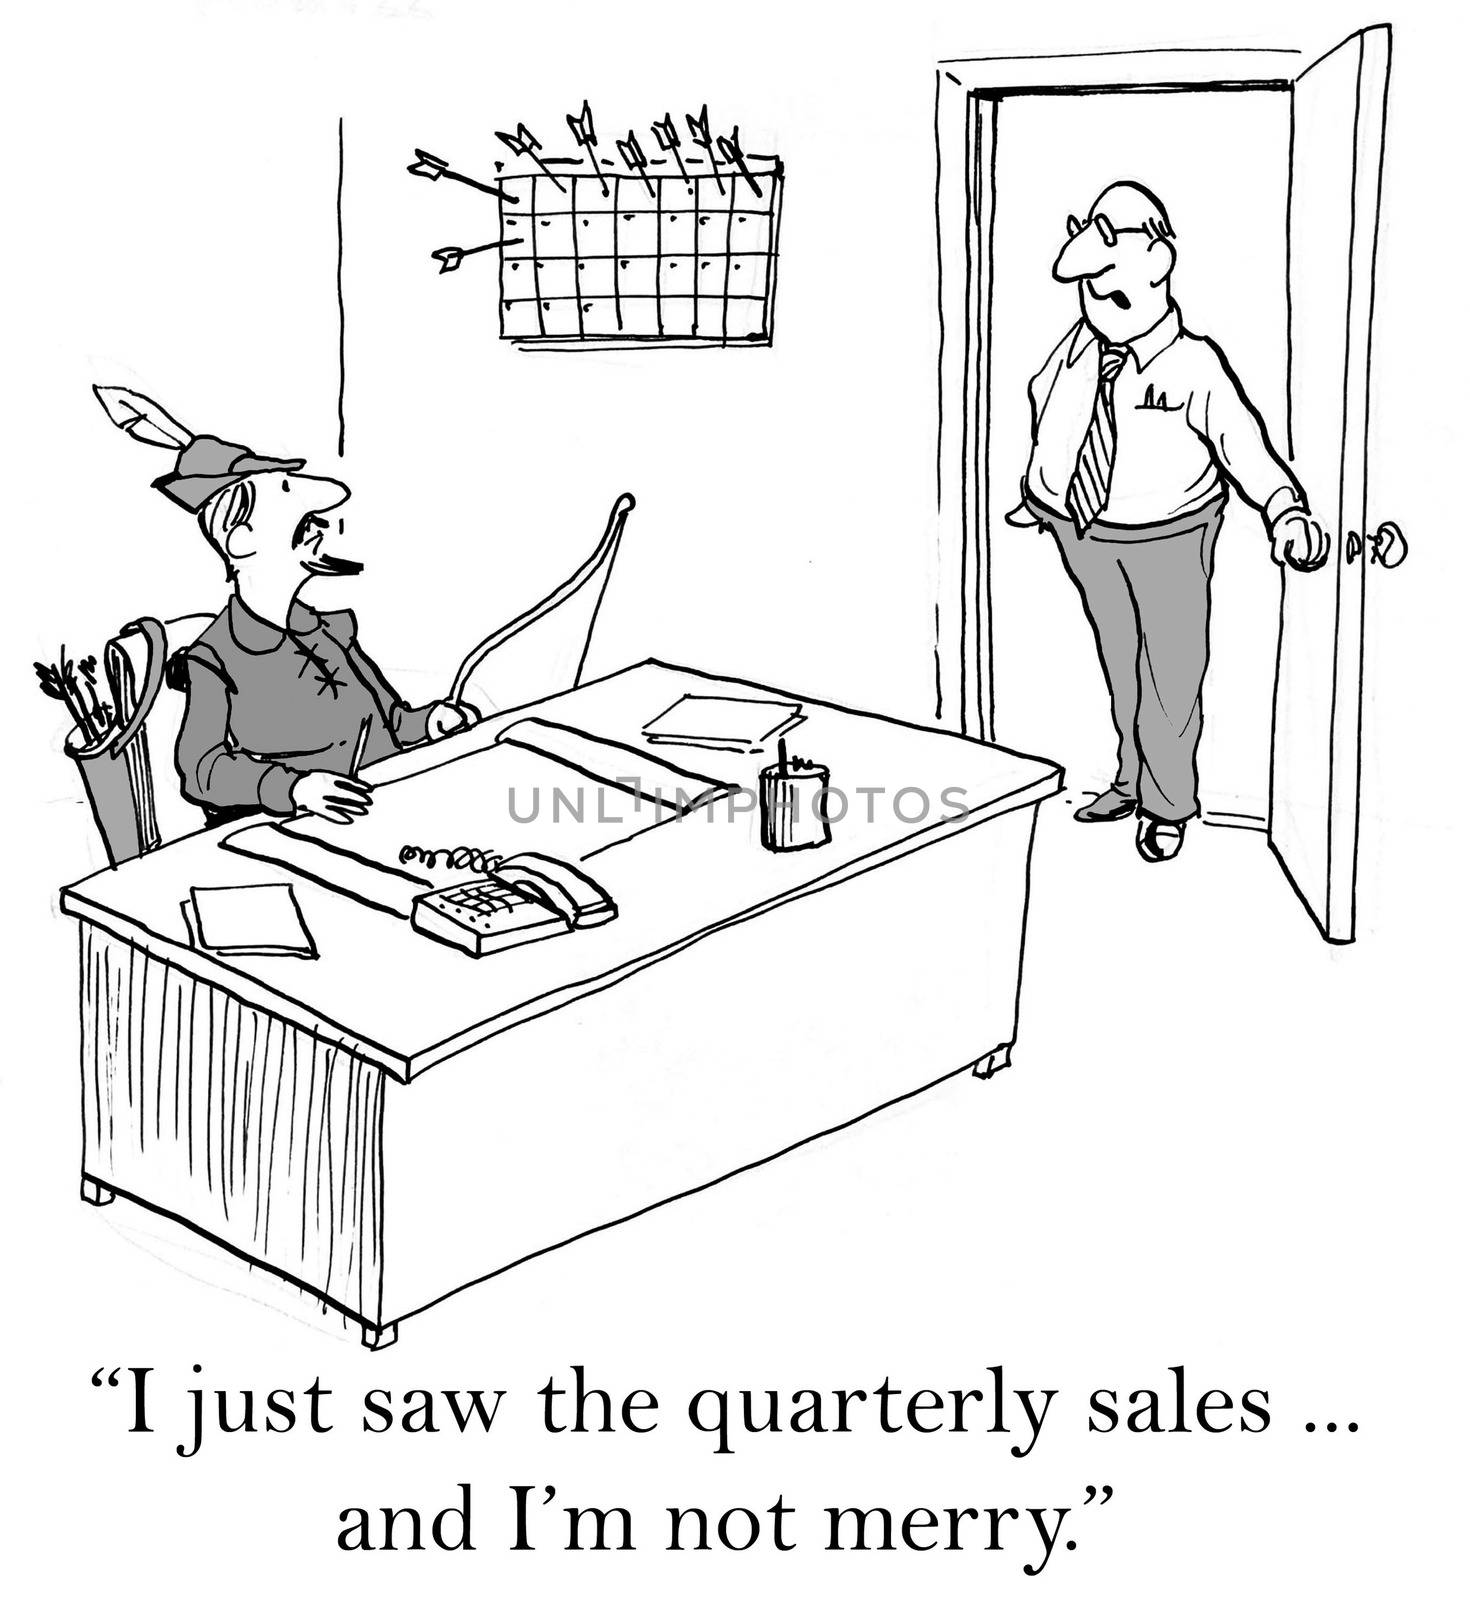 "I just saw the quarterly sales ... and I'm not merry."